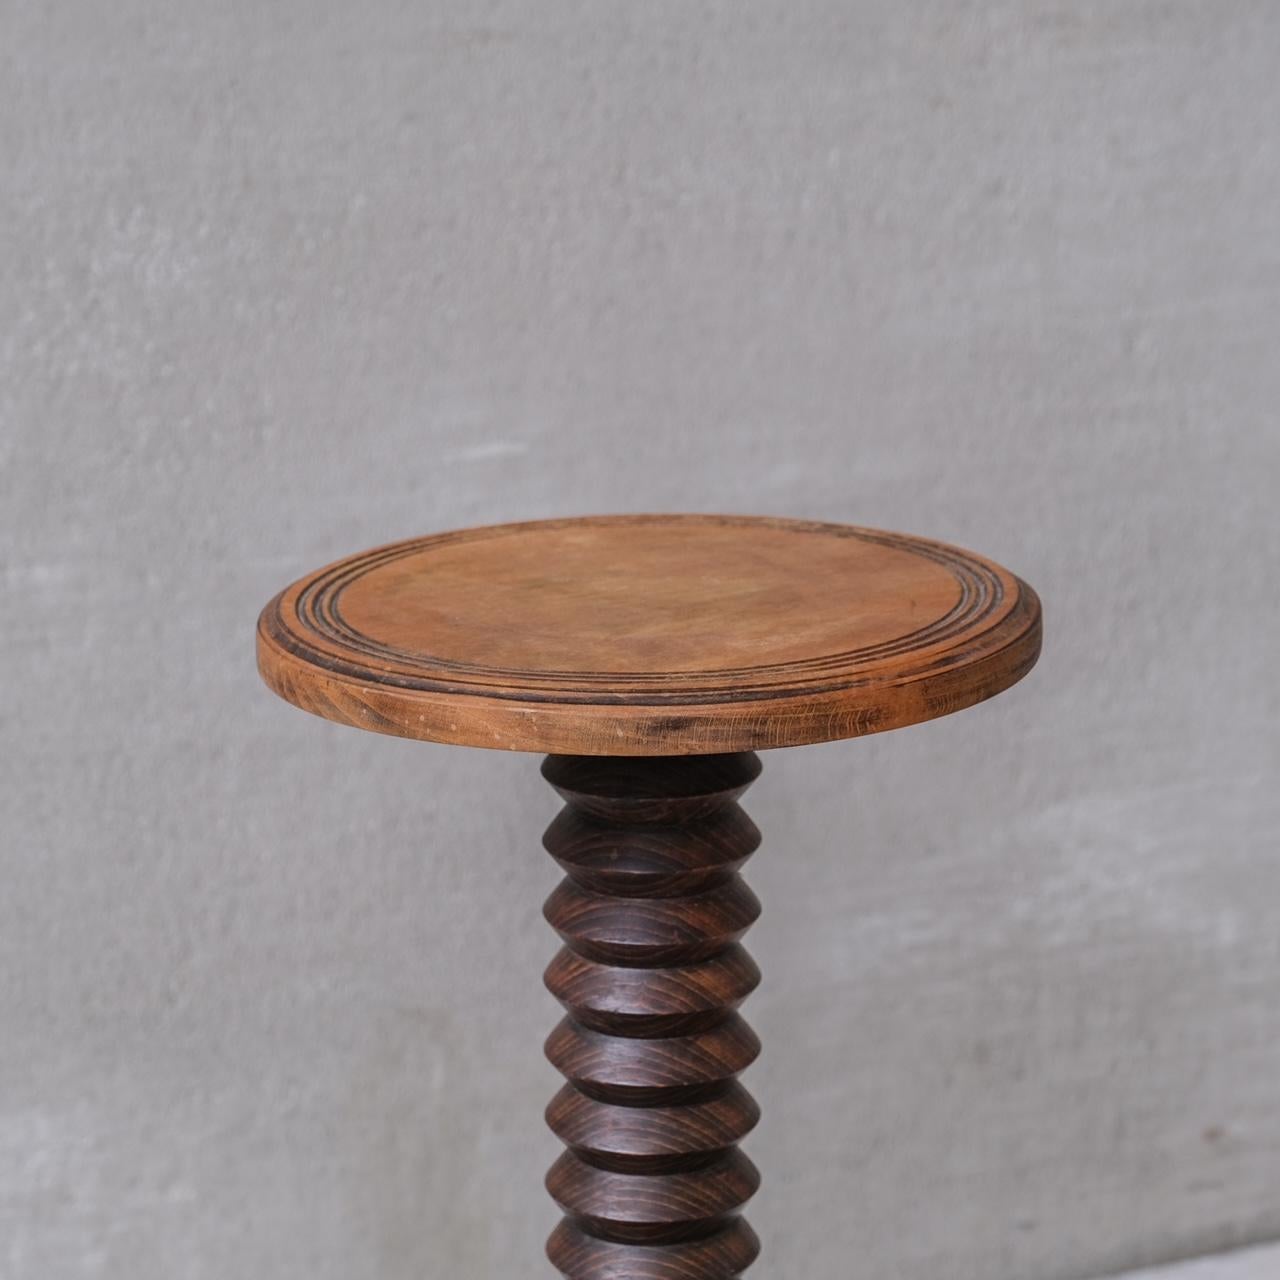 A turned oak pedestal or plant stand in the manner of Dudouyt.

France, c1950s.

Ideal for sculpture, lamps or plants.

Good vintage condition, some scuffs and wear commensurate with age.

Internal Ref: 12/9/23/007.

Location: Belgium